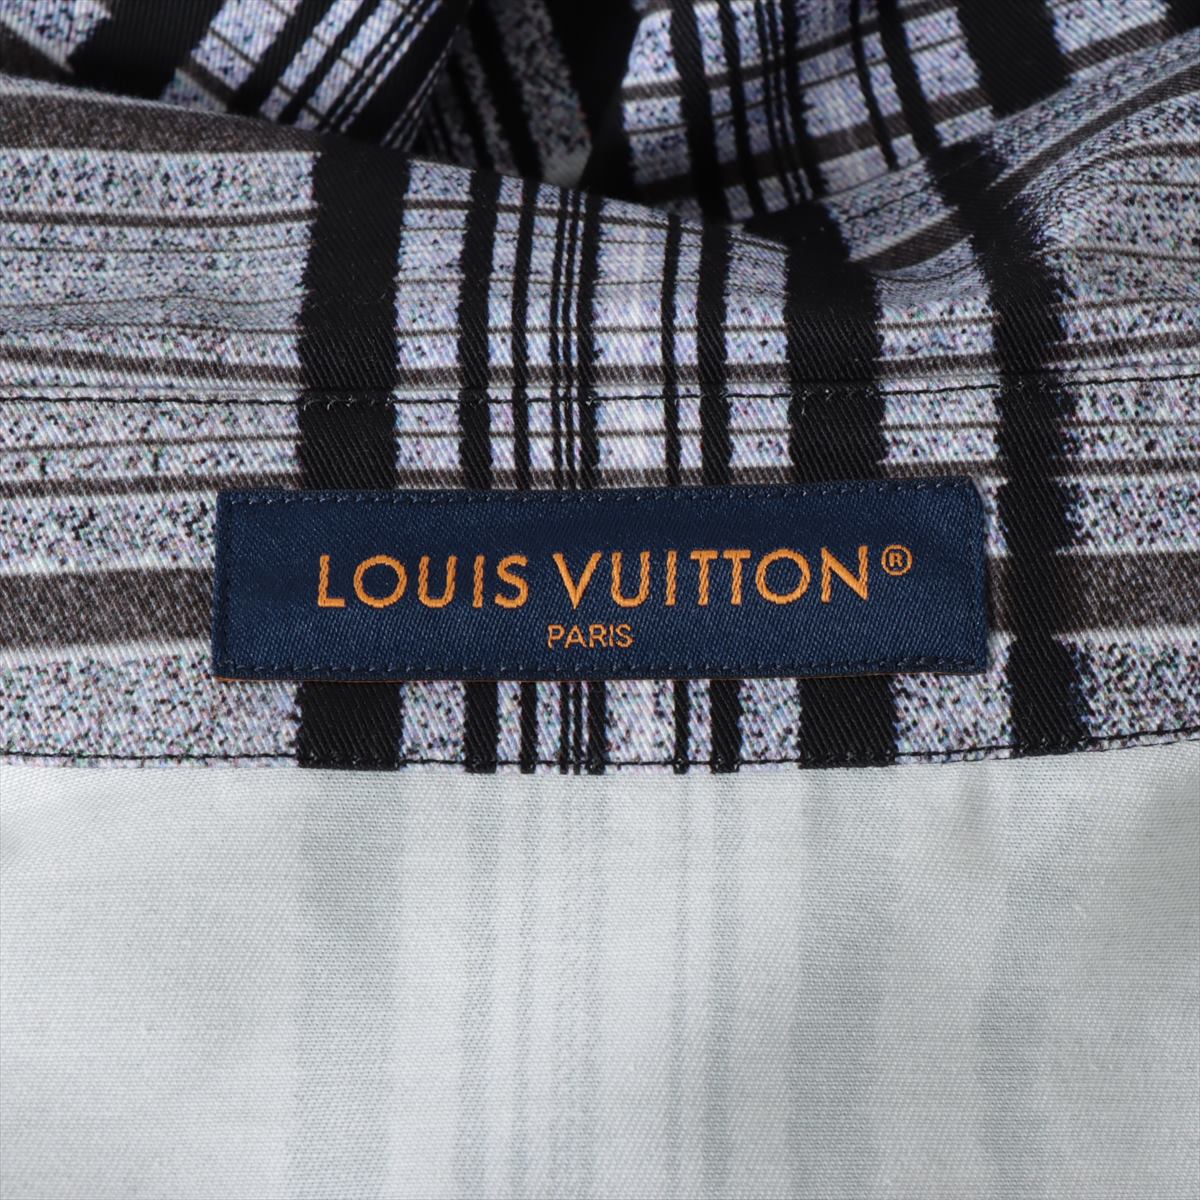 Louis Vuitton 23AW Cotton Shirt L Men's Multicolor  RM232 printed  Oversized 1ABY24